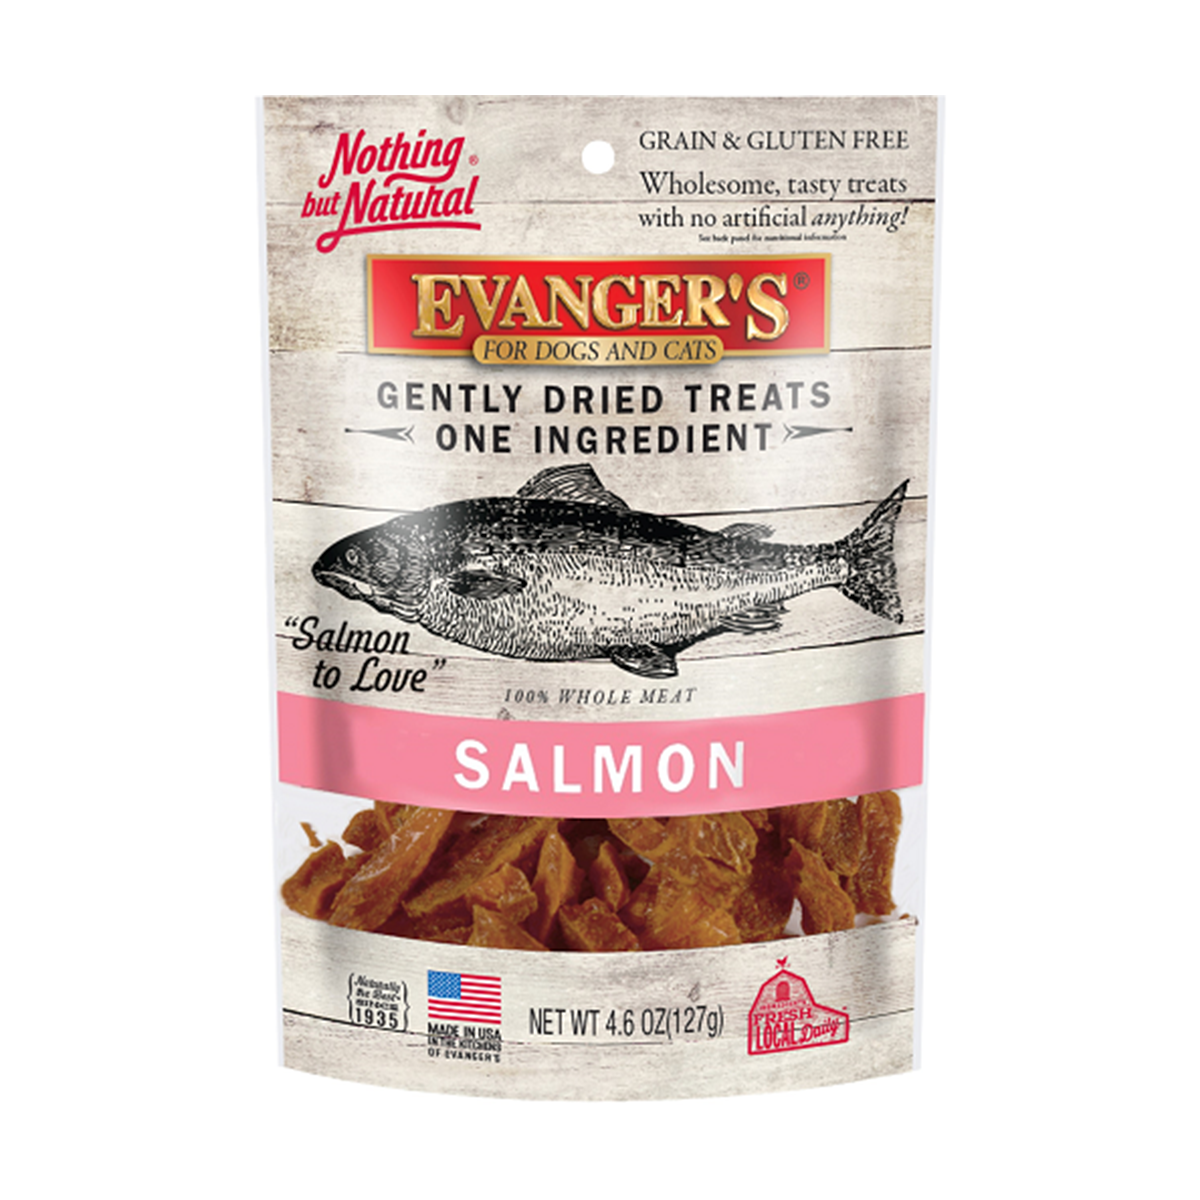 Evangers Gently Dried Dog and Cat Treats - Salmon